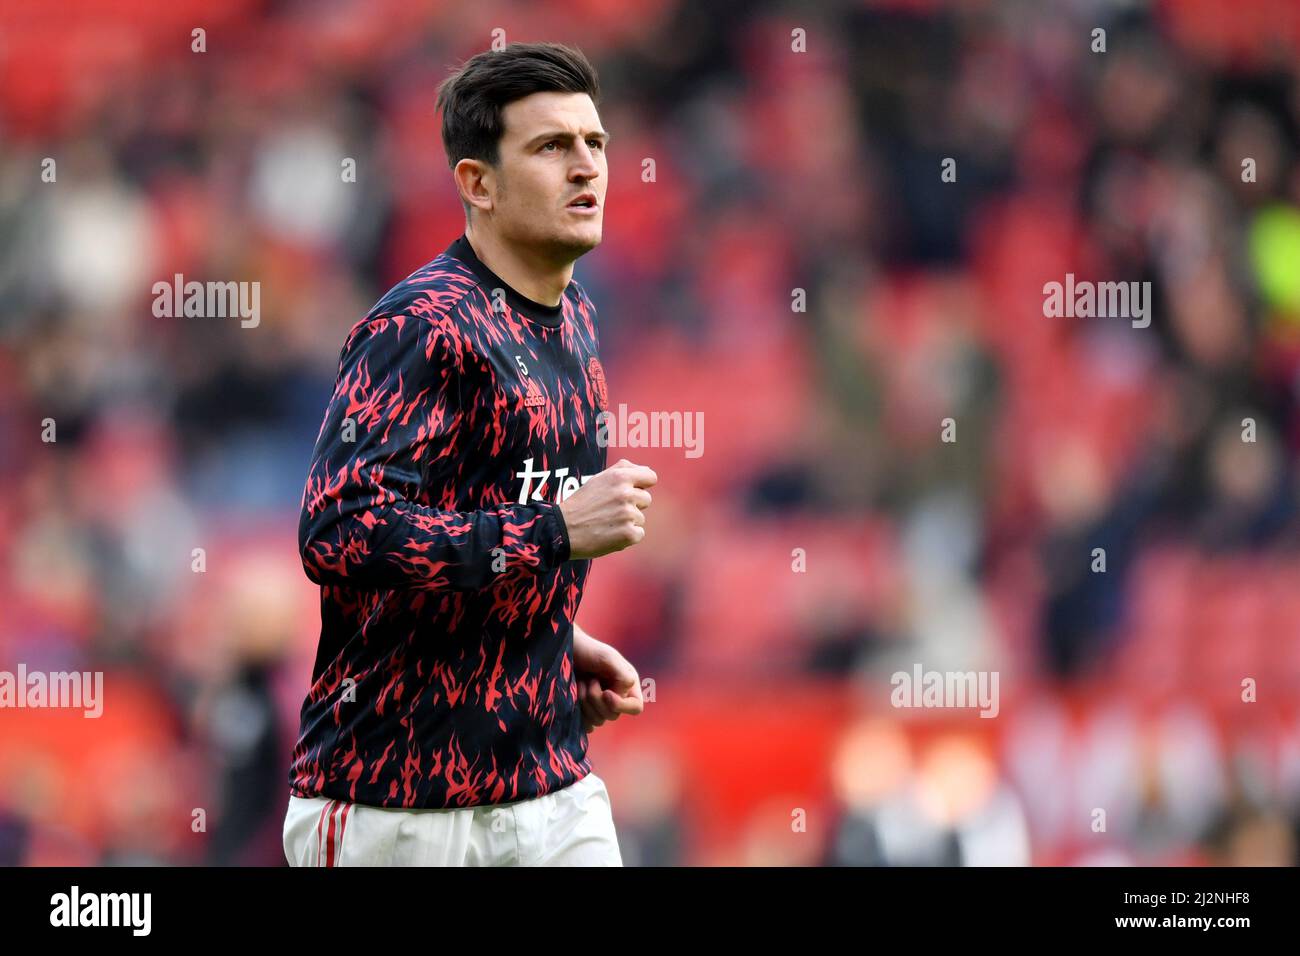 Manchester United's Harry Maguire during the Premier League match at Old Trafford, Greater Manchester, UK. Picture date: Saturday April 2, 2022. Photo credit should read: Anthony Devlin Stock Photo